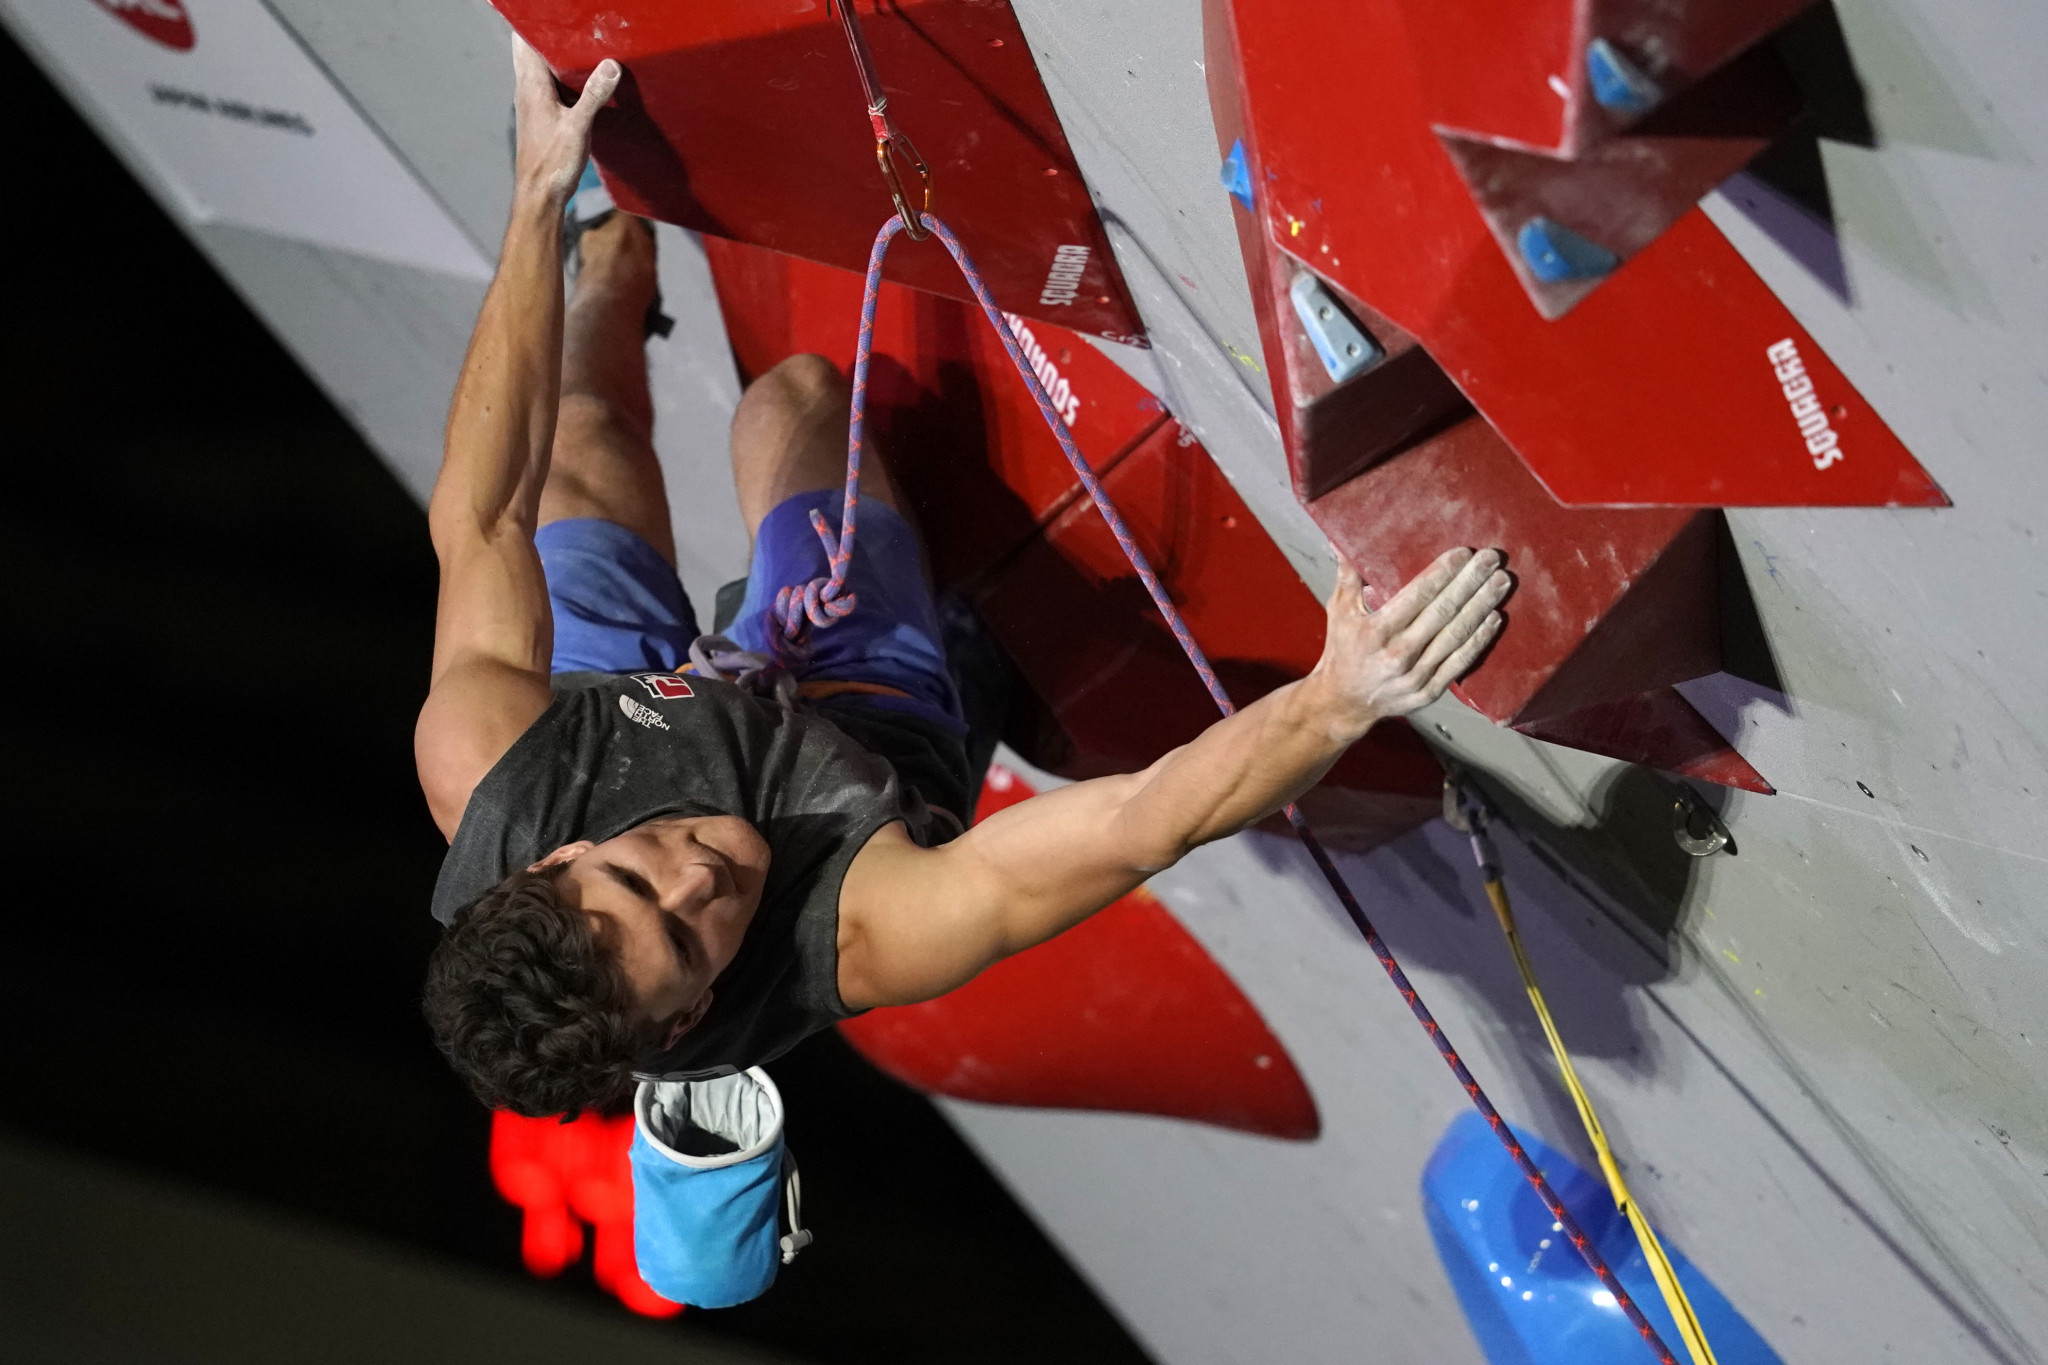 Salt Lake City to stage back-to-back IFSC World Cup events